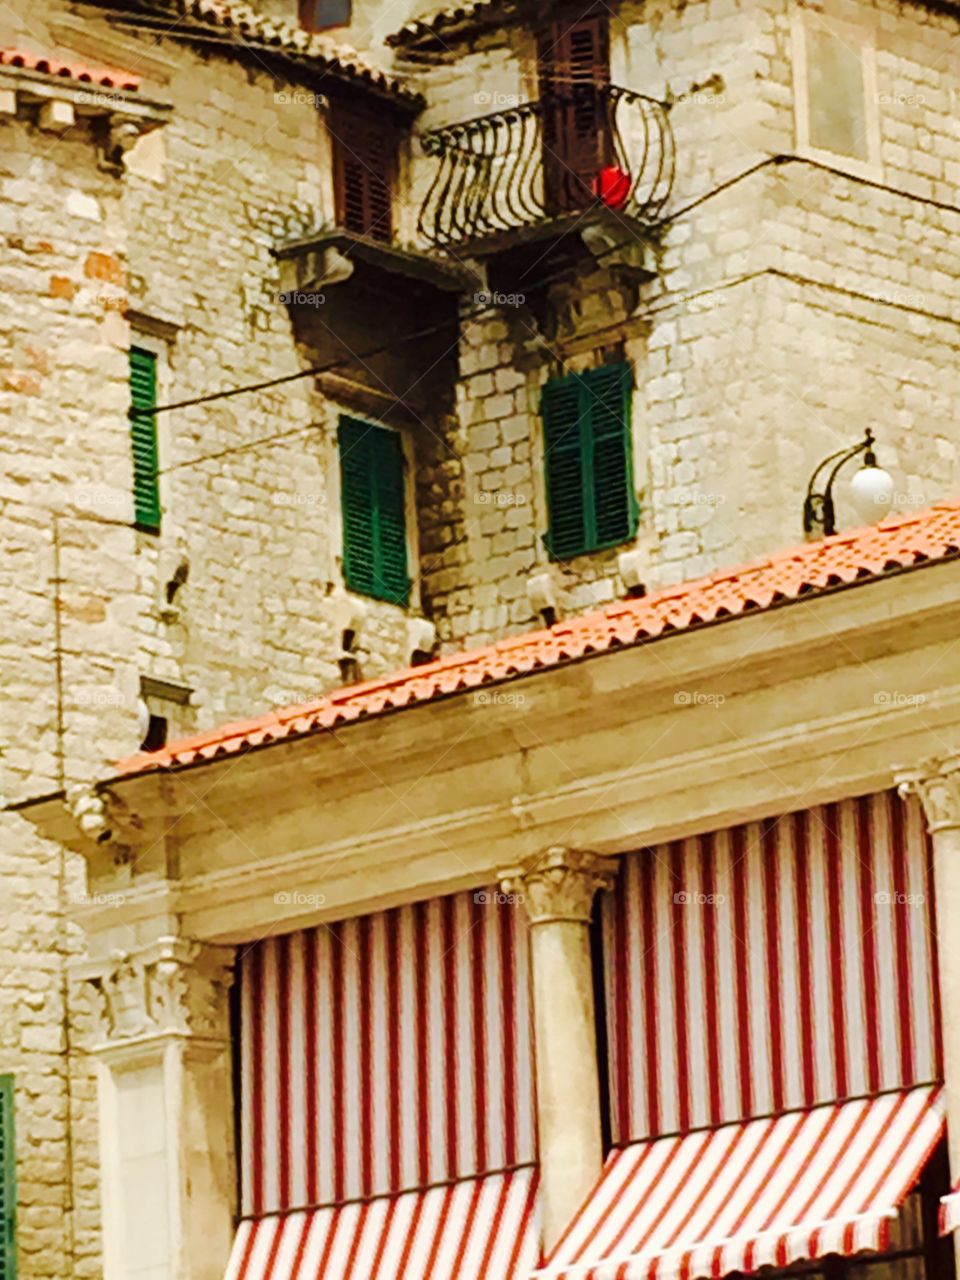 Red bucket on balcony . Walking in medieval town within Croatia this colorful item on balcony caught my eye 